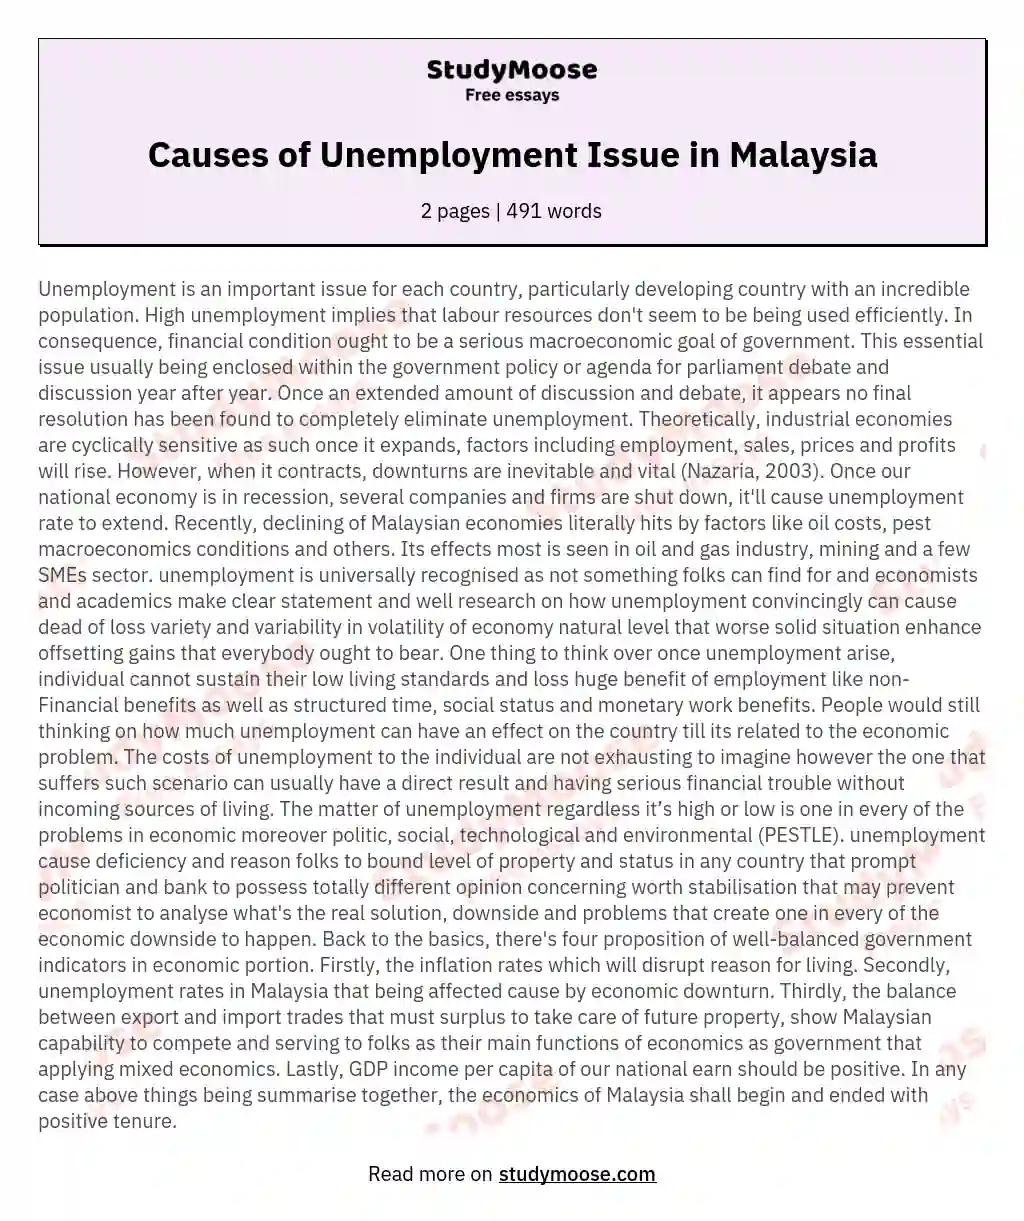 Causes of Unemployment Issue in Malaysia essay